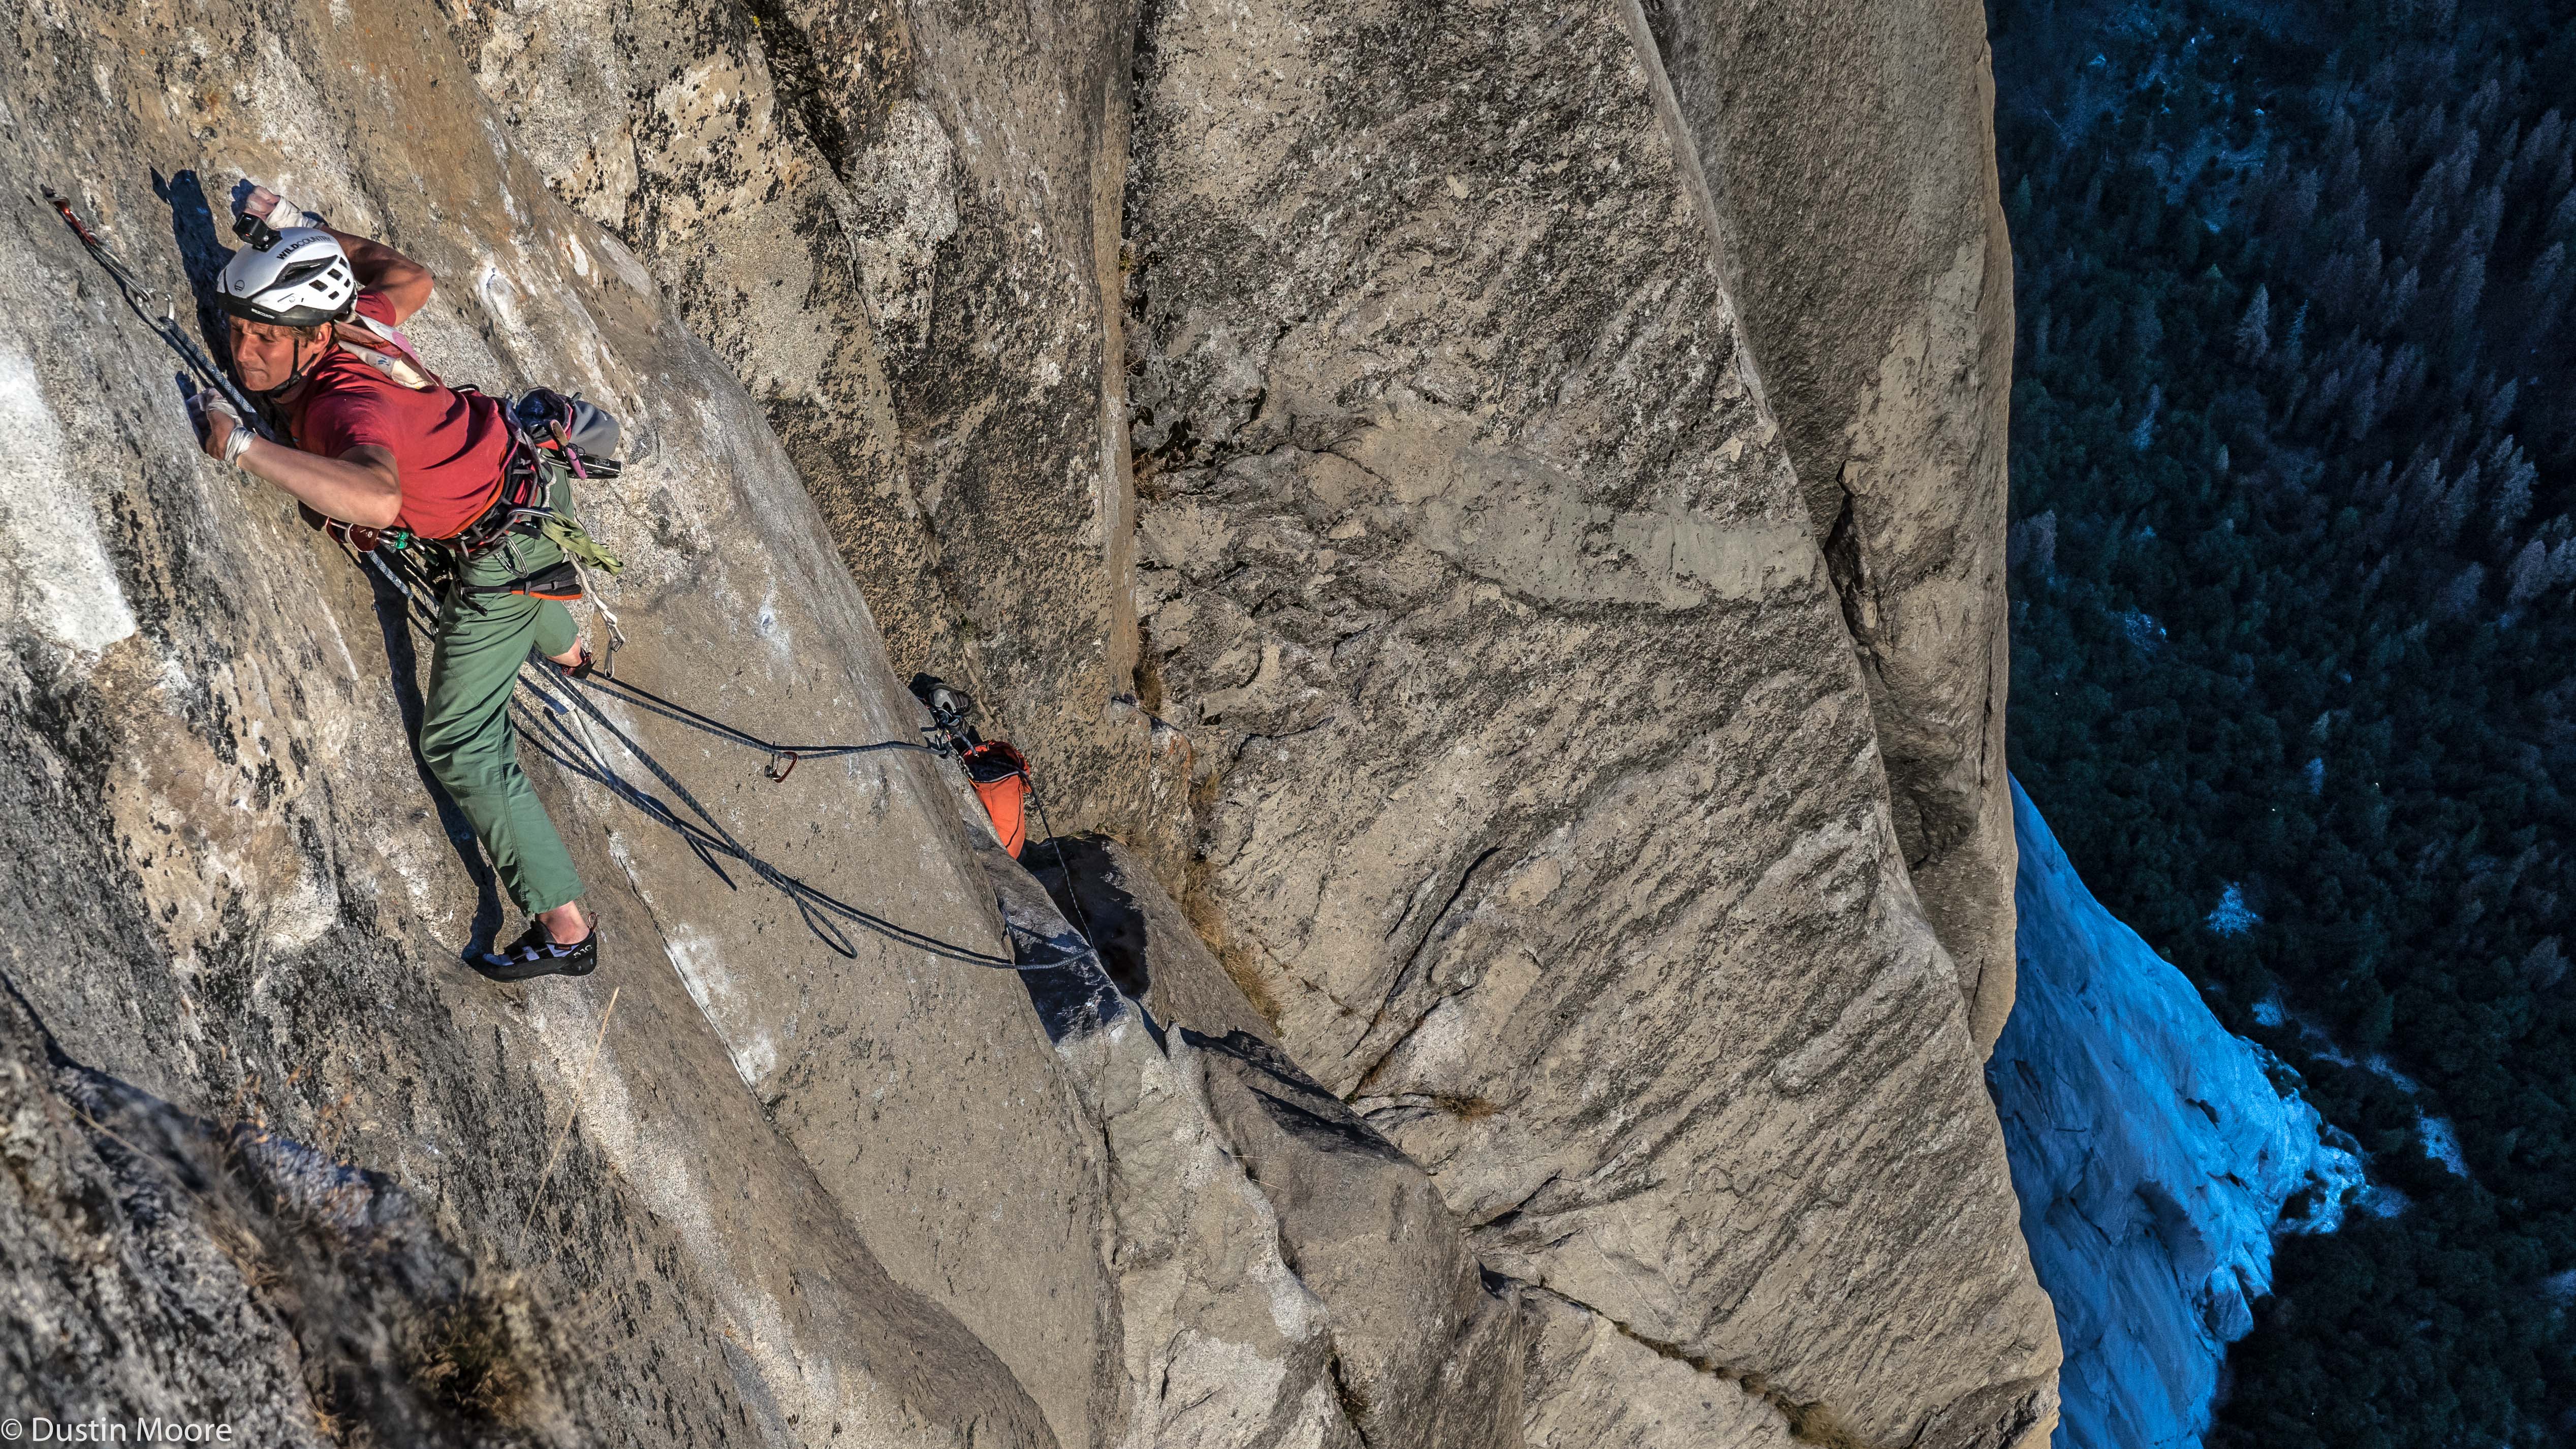 Pete Whittaker sends the Boulder Problem variation (5.13a) on El Capitan's Freerider (VI 5.12d or 5.13a). [Photo] Dustin Moore